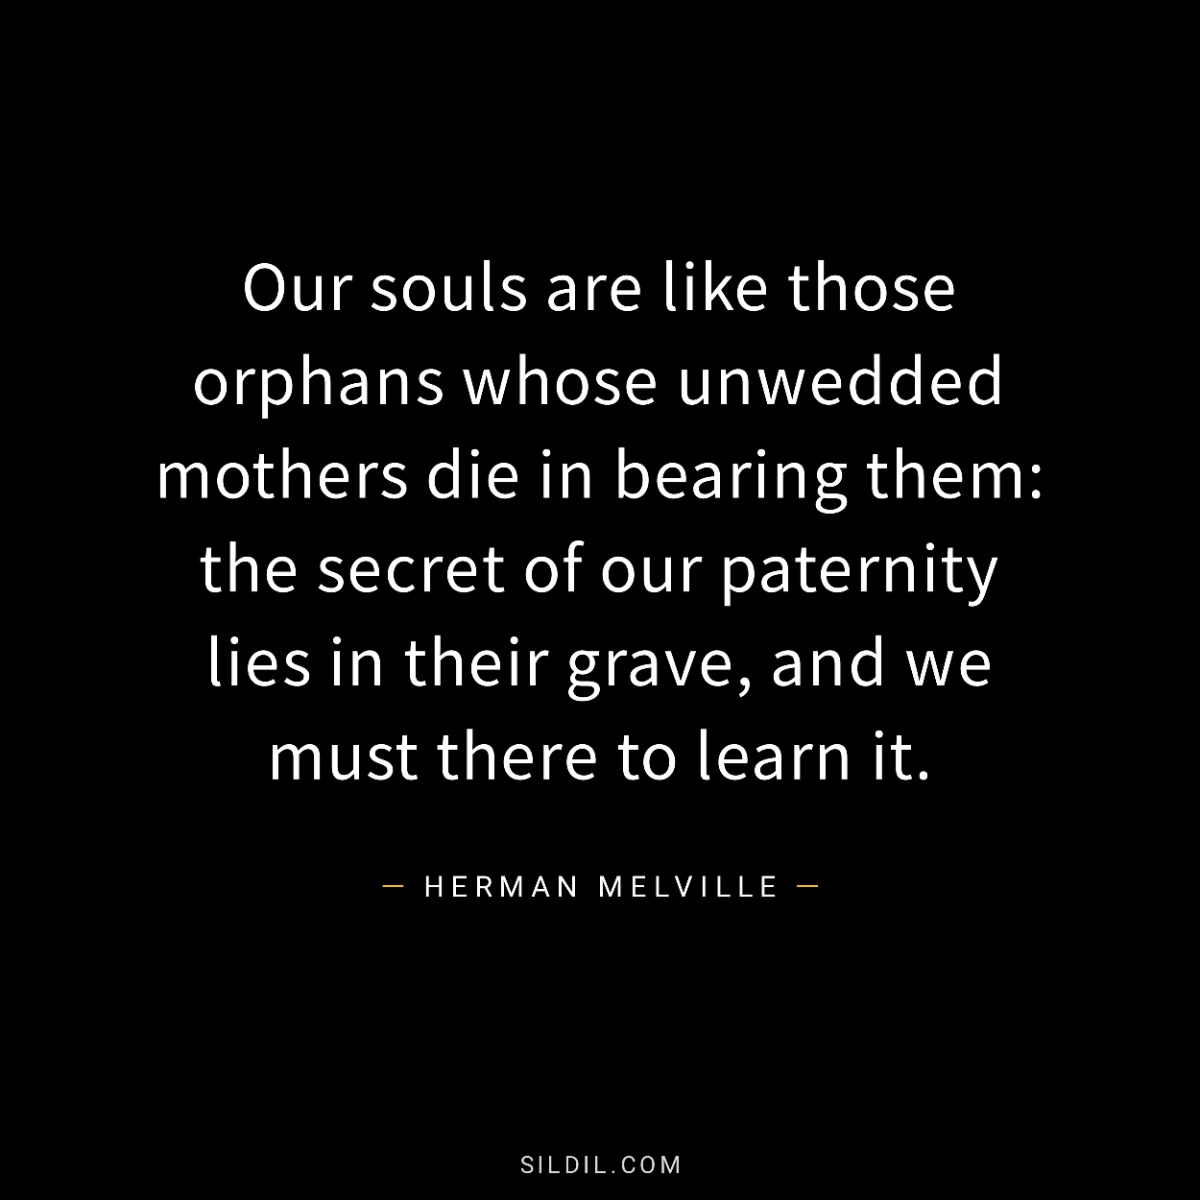 Our souls are like those orphans whose unwedded mothers die in bearing them: the secret of our paternity lies in their grave, and we must there to learn it.